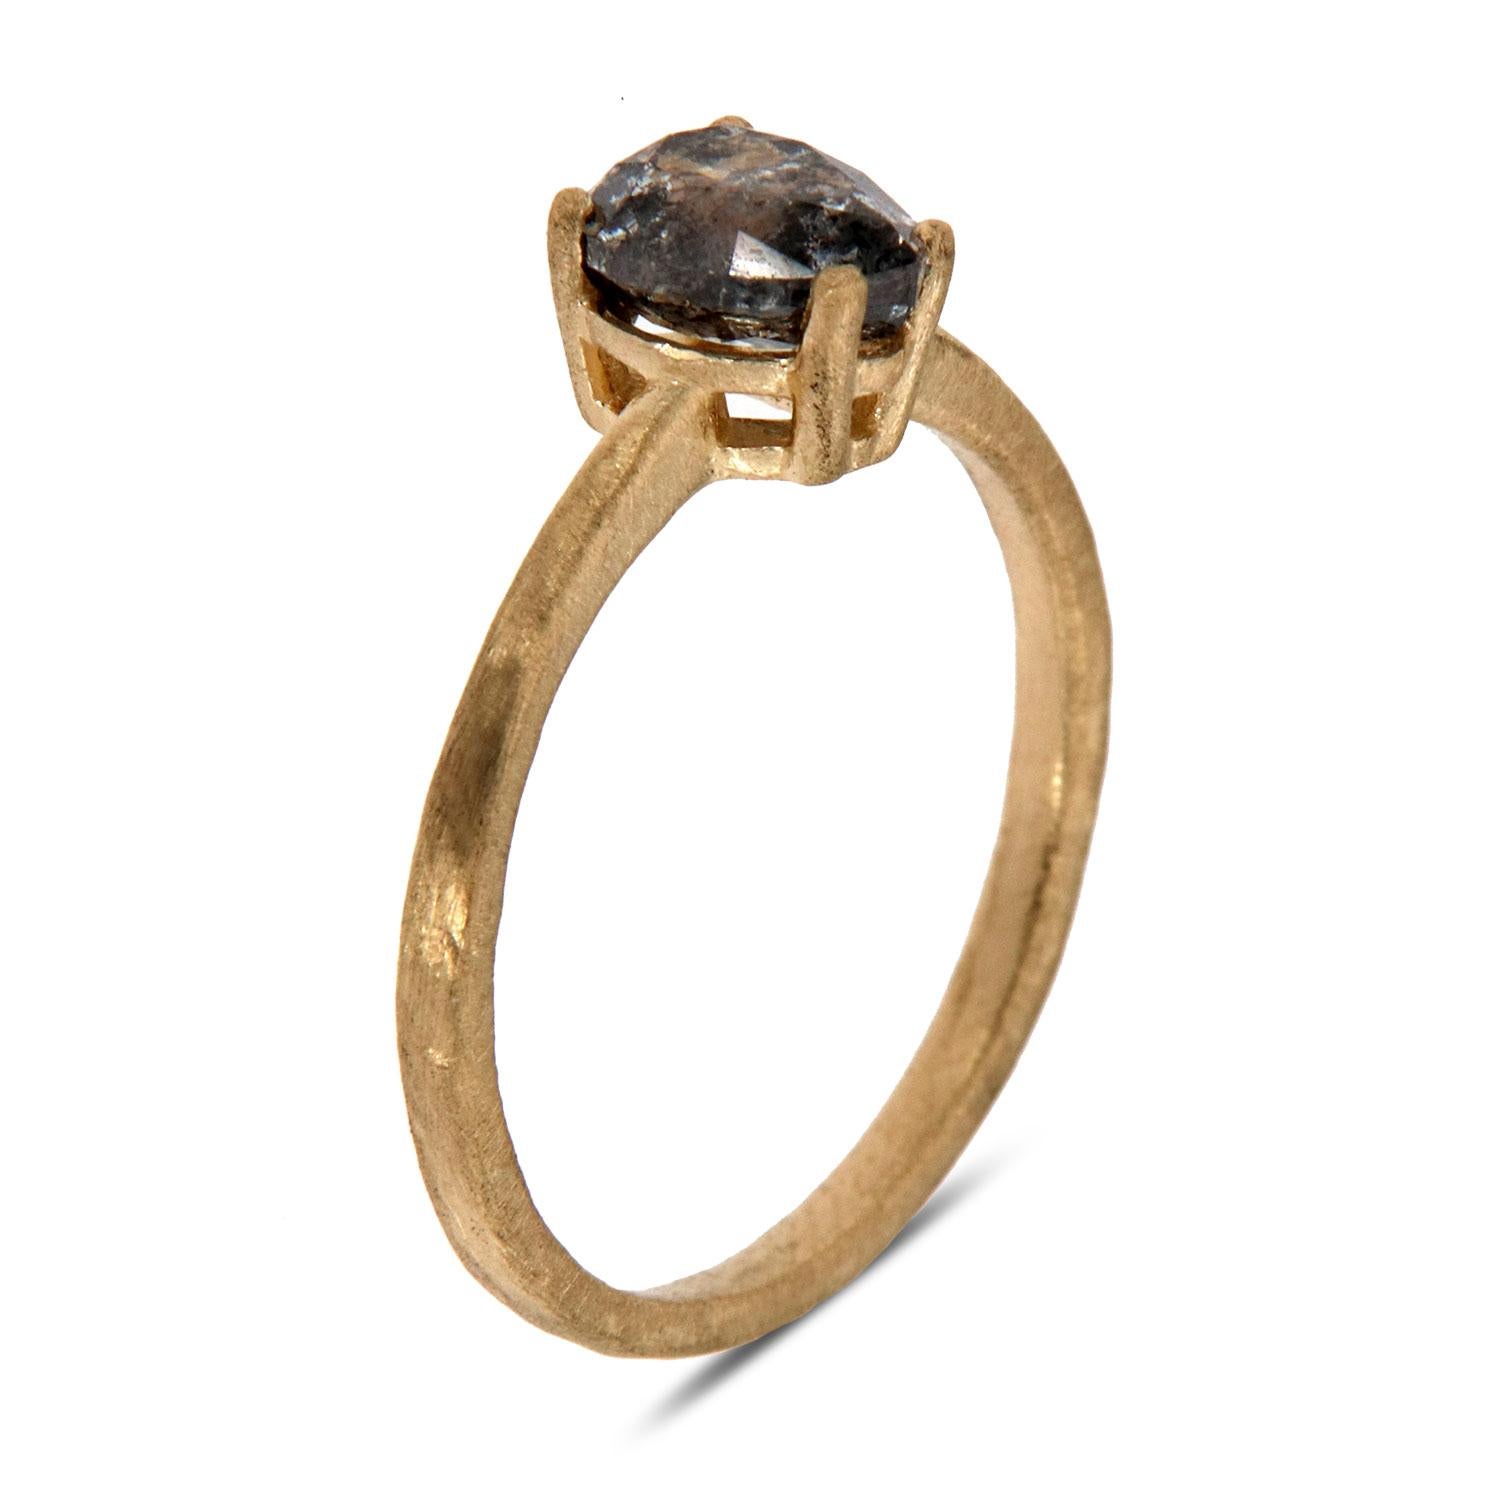 This Earthy design solitaire ring features a 1.12 -Carat Salt & Pepper Pear Shape Natural diamond prong- set on a 1.5 mm matte-finished band. The unique texture that we applied to the band adds to the ring's rustic appeal. Experience the difference